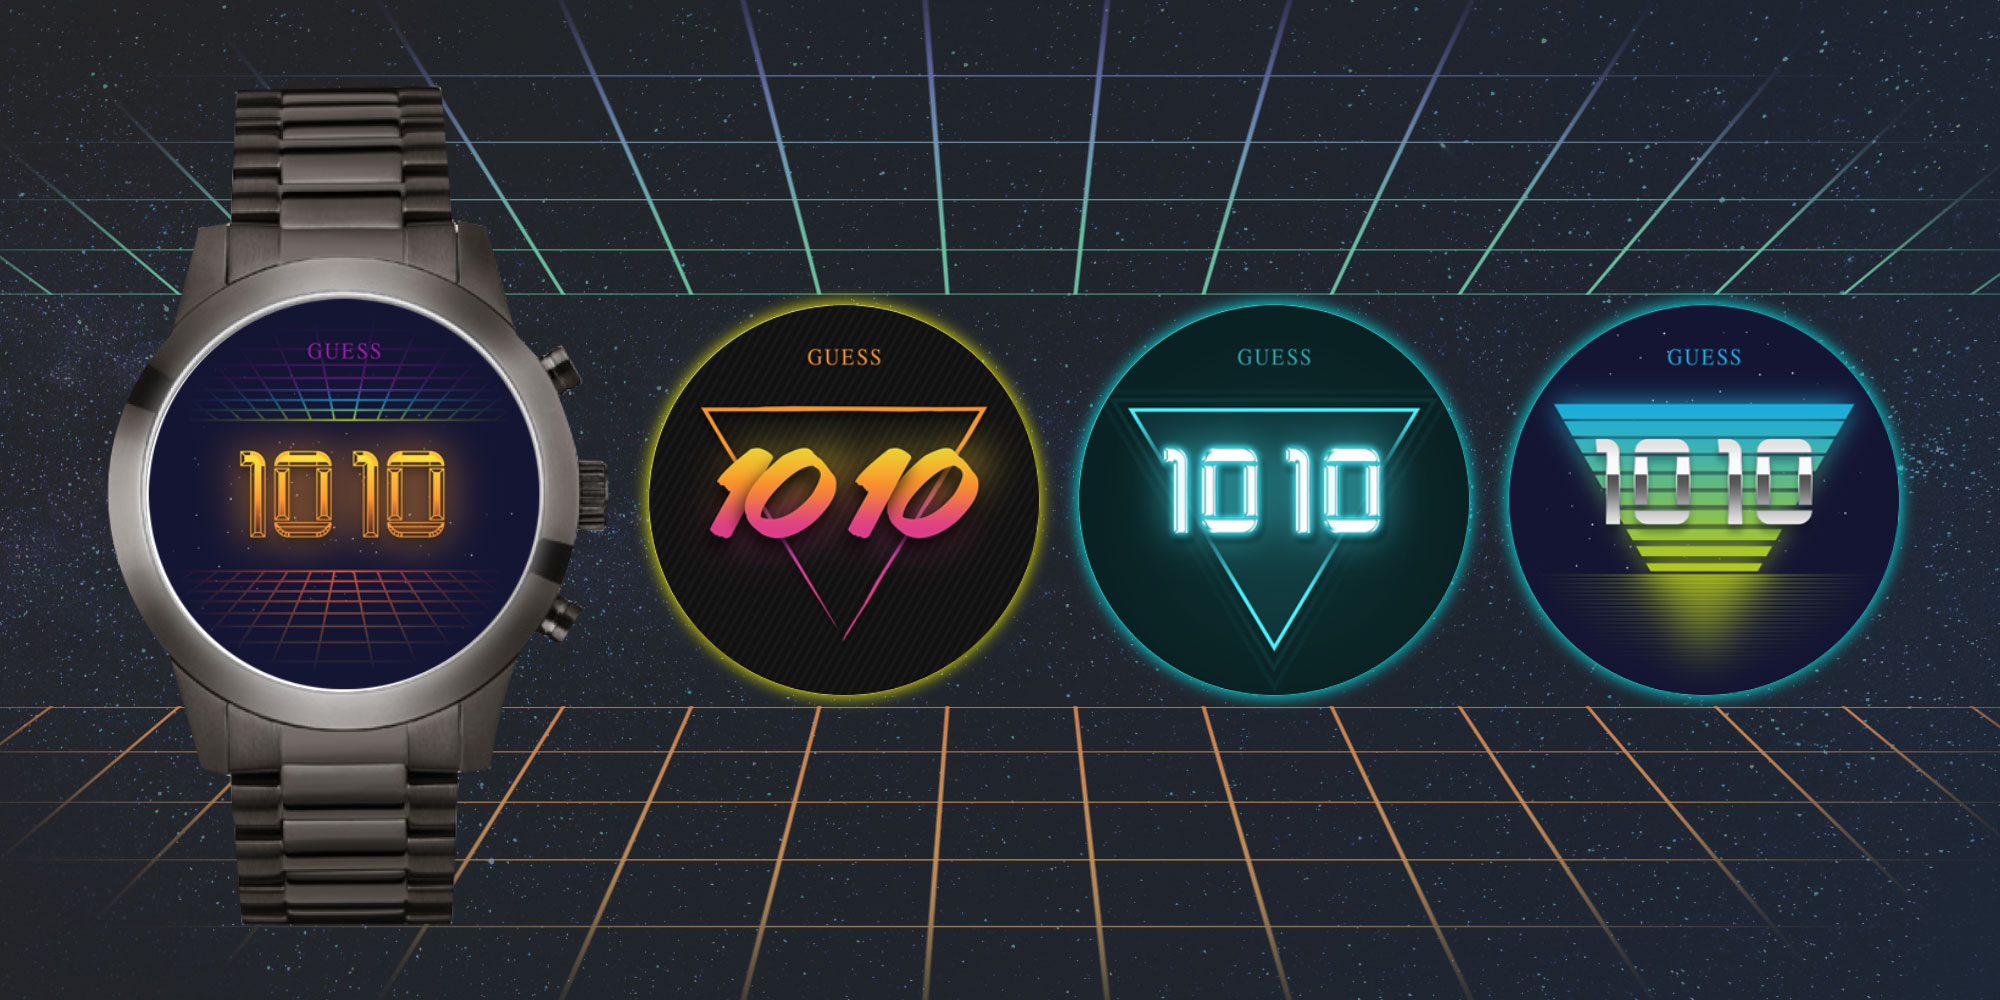 guess-watches-ustwo-arcade